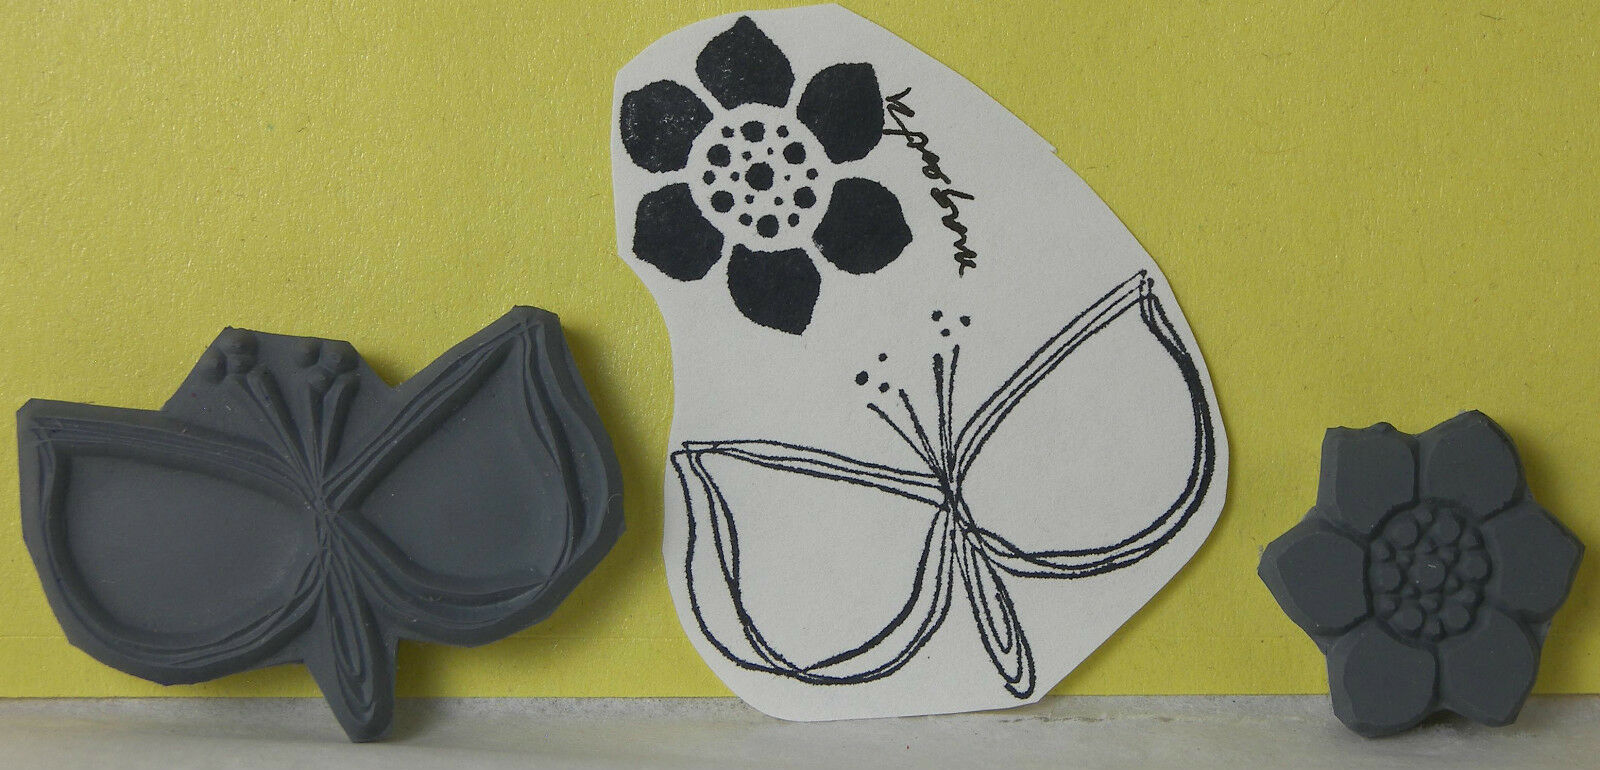 Magenta Flower & Leaves Rubber Stamp Unmounted Stylized Graphic in 2 Parts - $9.74